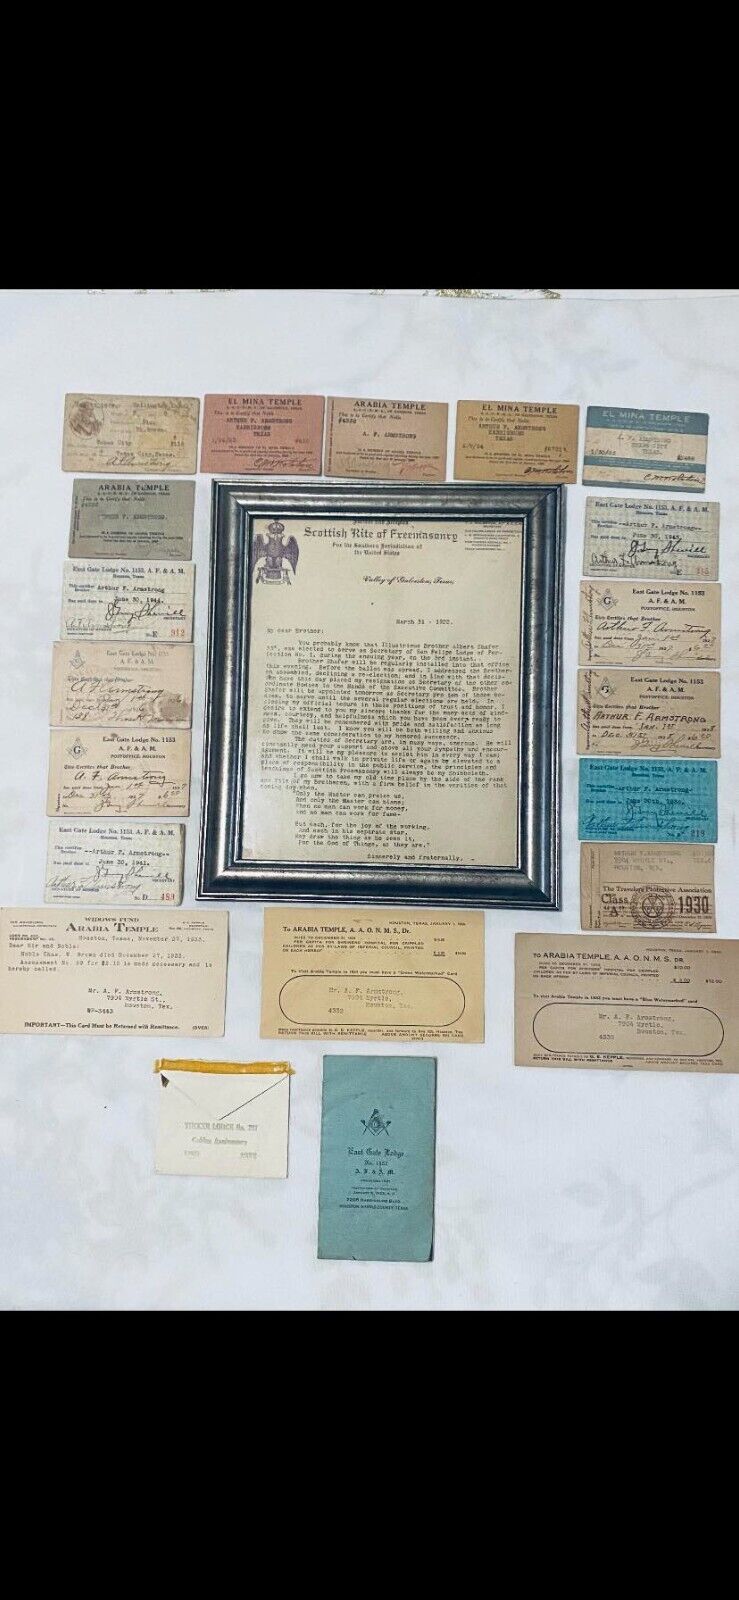 Vintage Scottish rite , Arabia temple membership cards, dues cards. 1880s/1940s